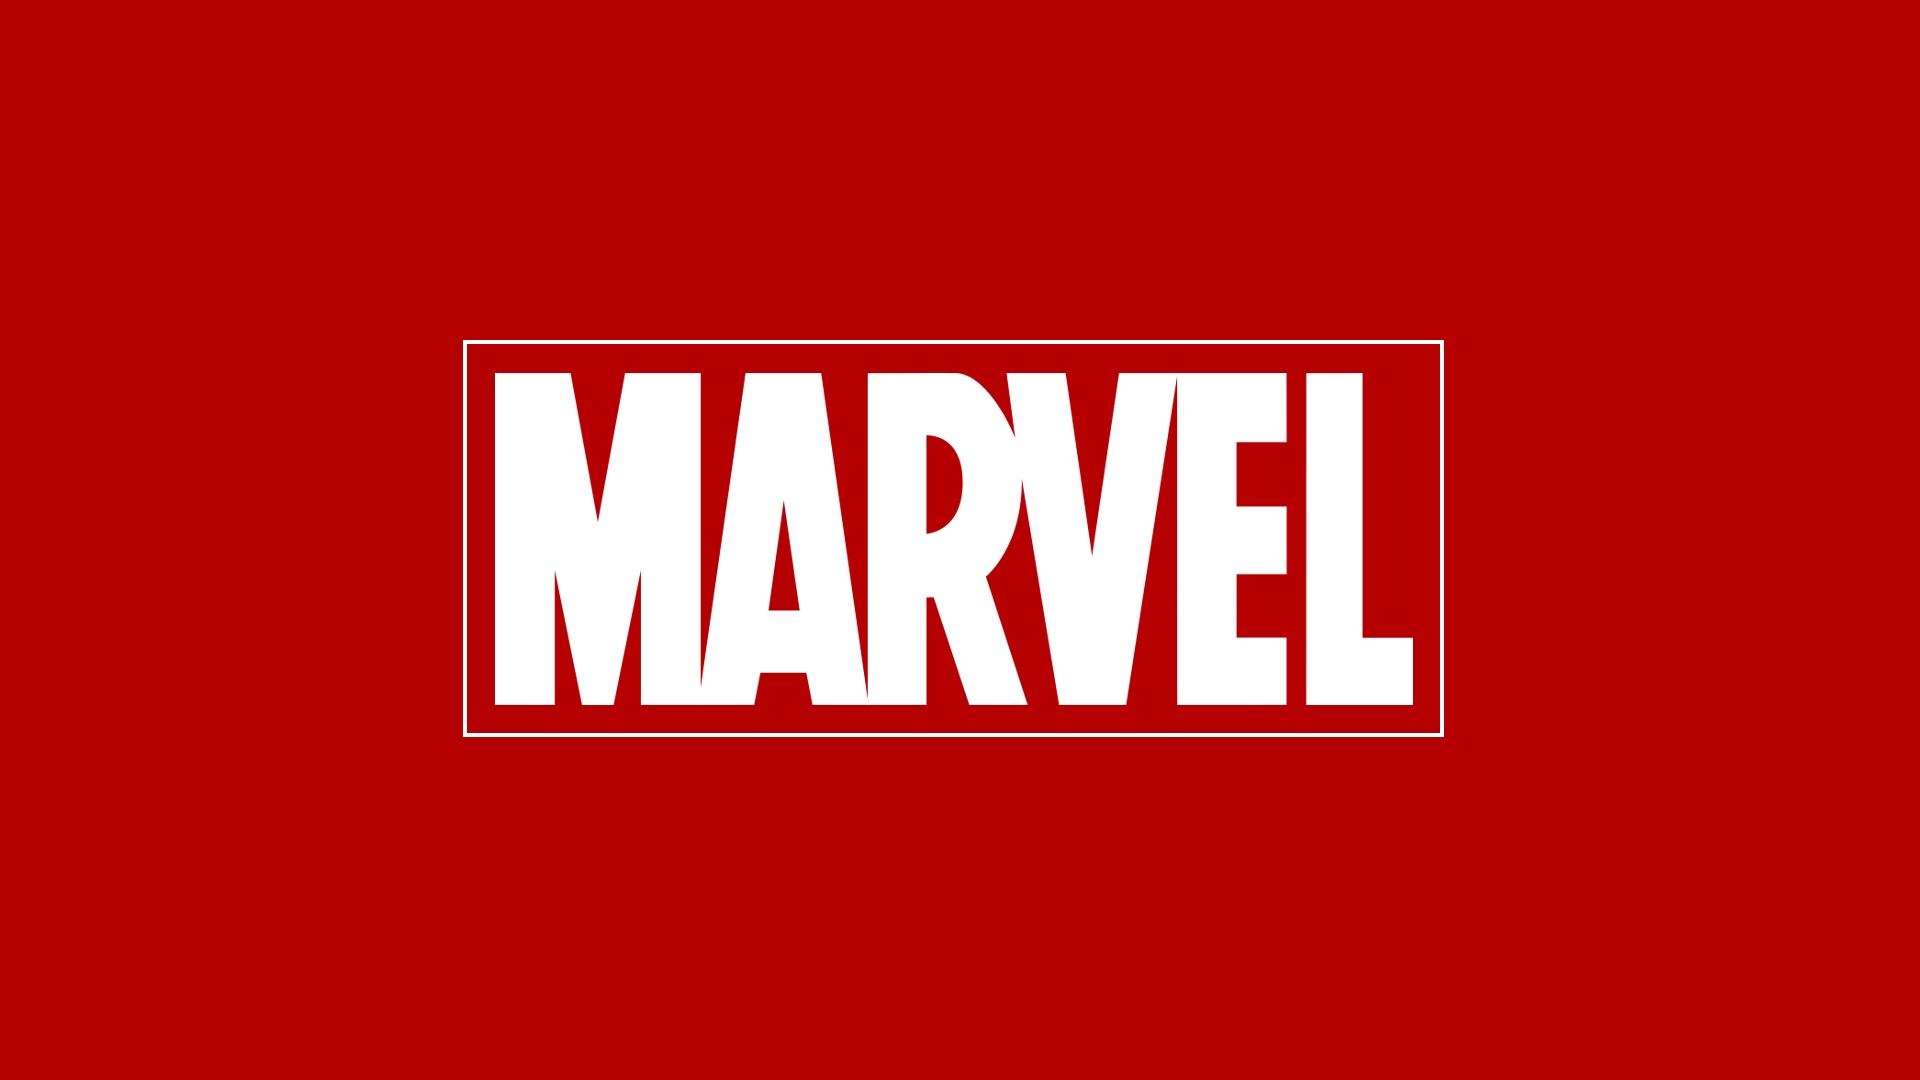 A Marvel multiplayer game for PS5 is reportedly in the works